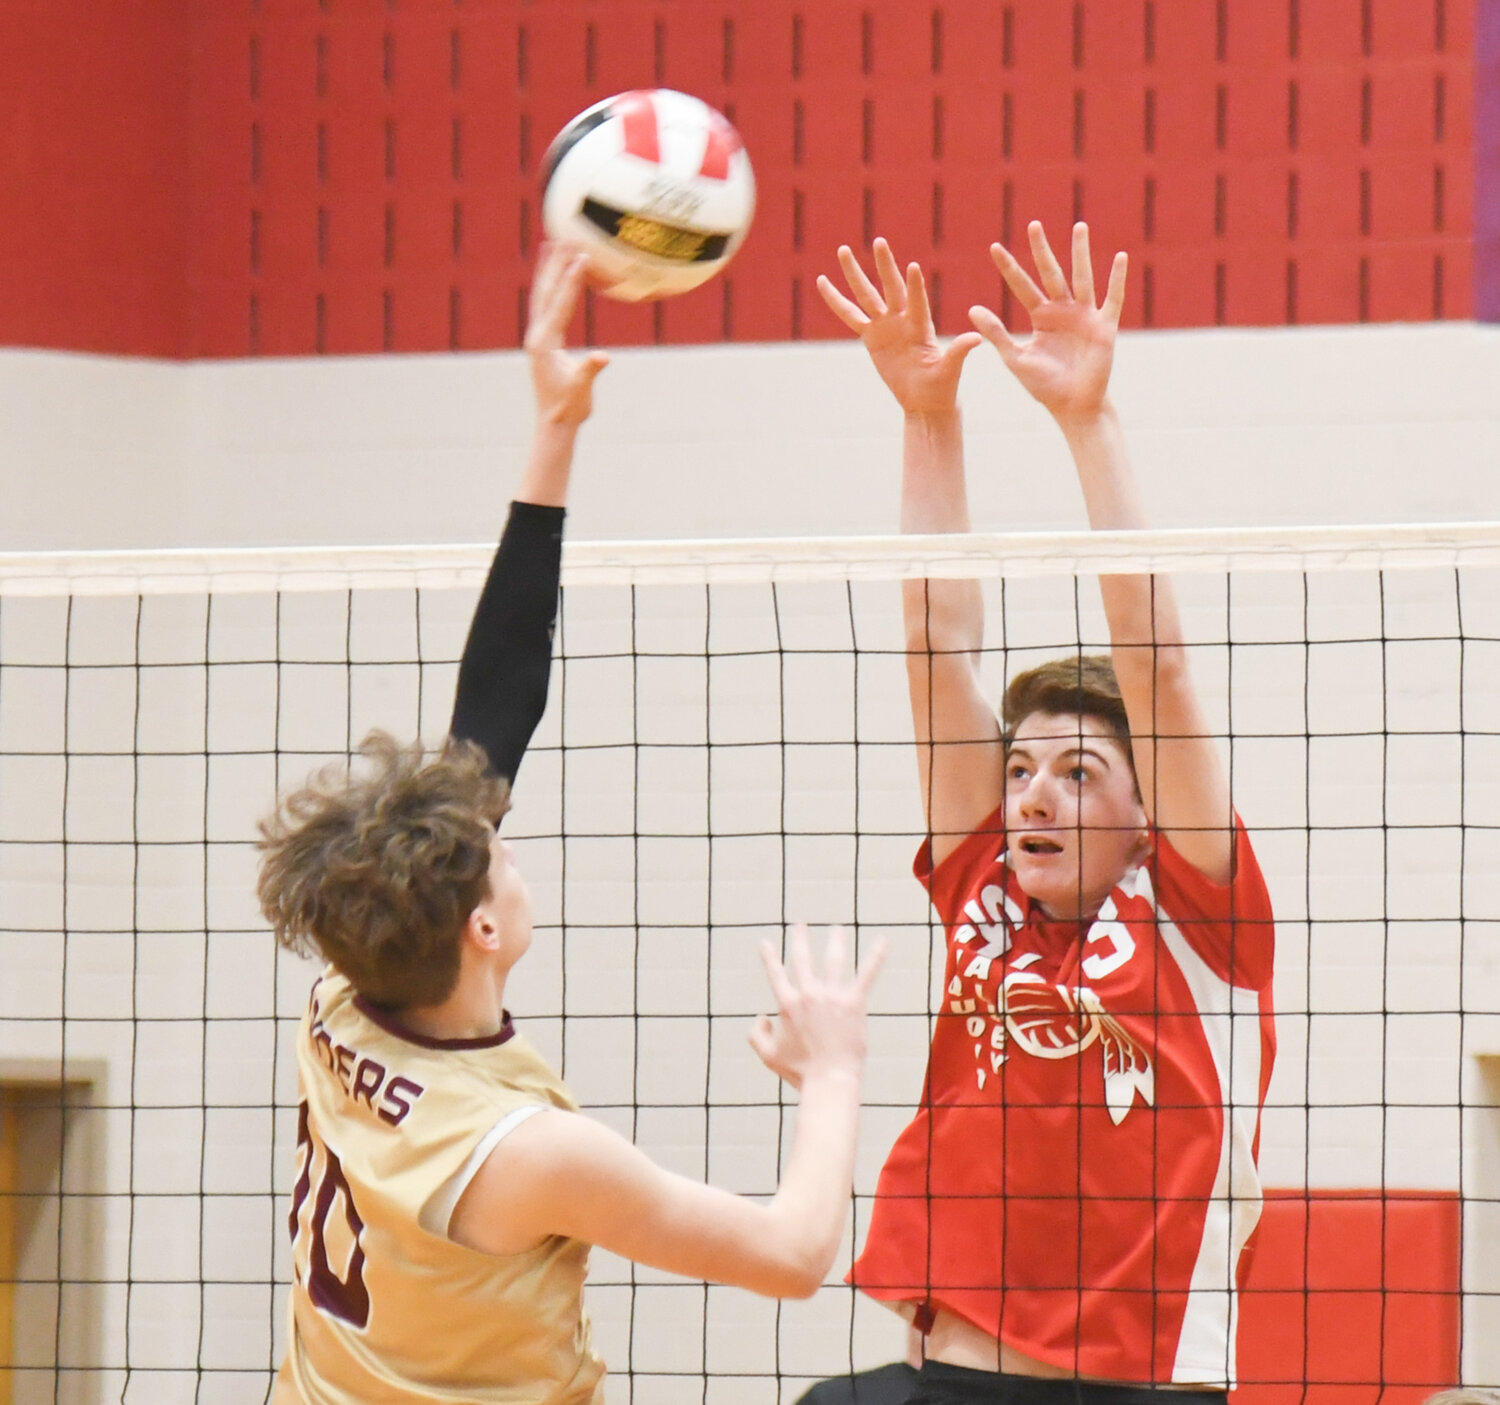 Mason Farwell of Sauquoit Valley, right, goes up for a block against Canastota in the Section III Class C championship in this file photo. Farwell was named the Section III Division I player of the year.